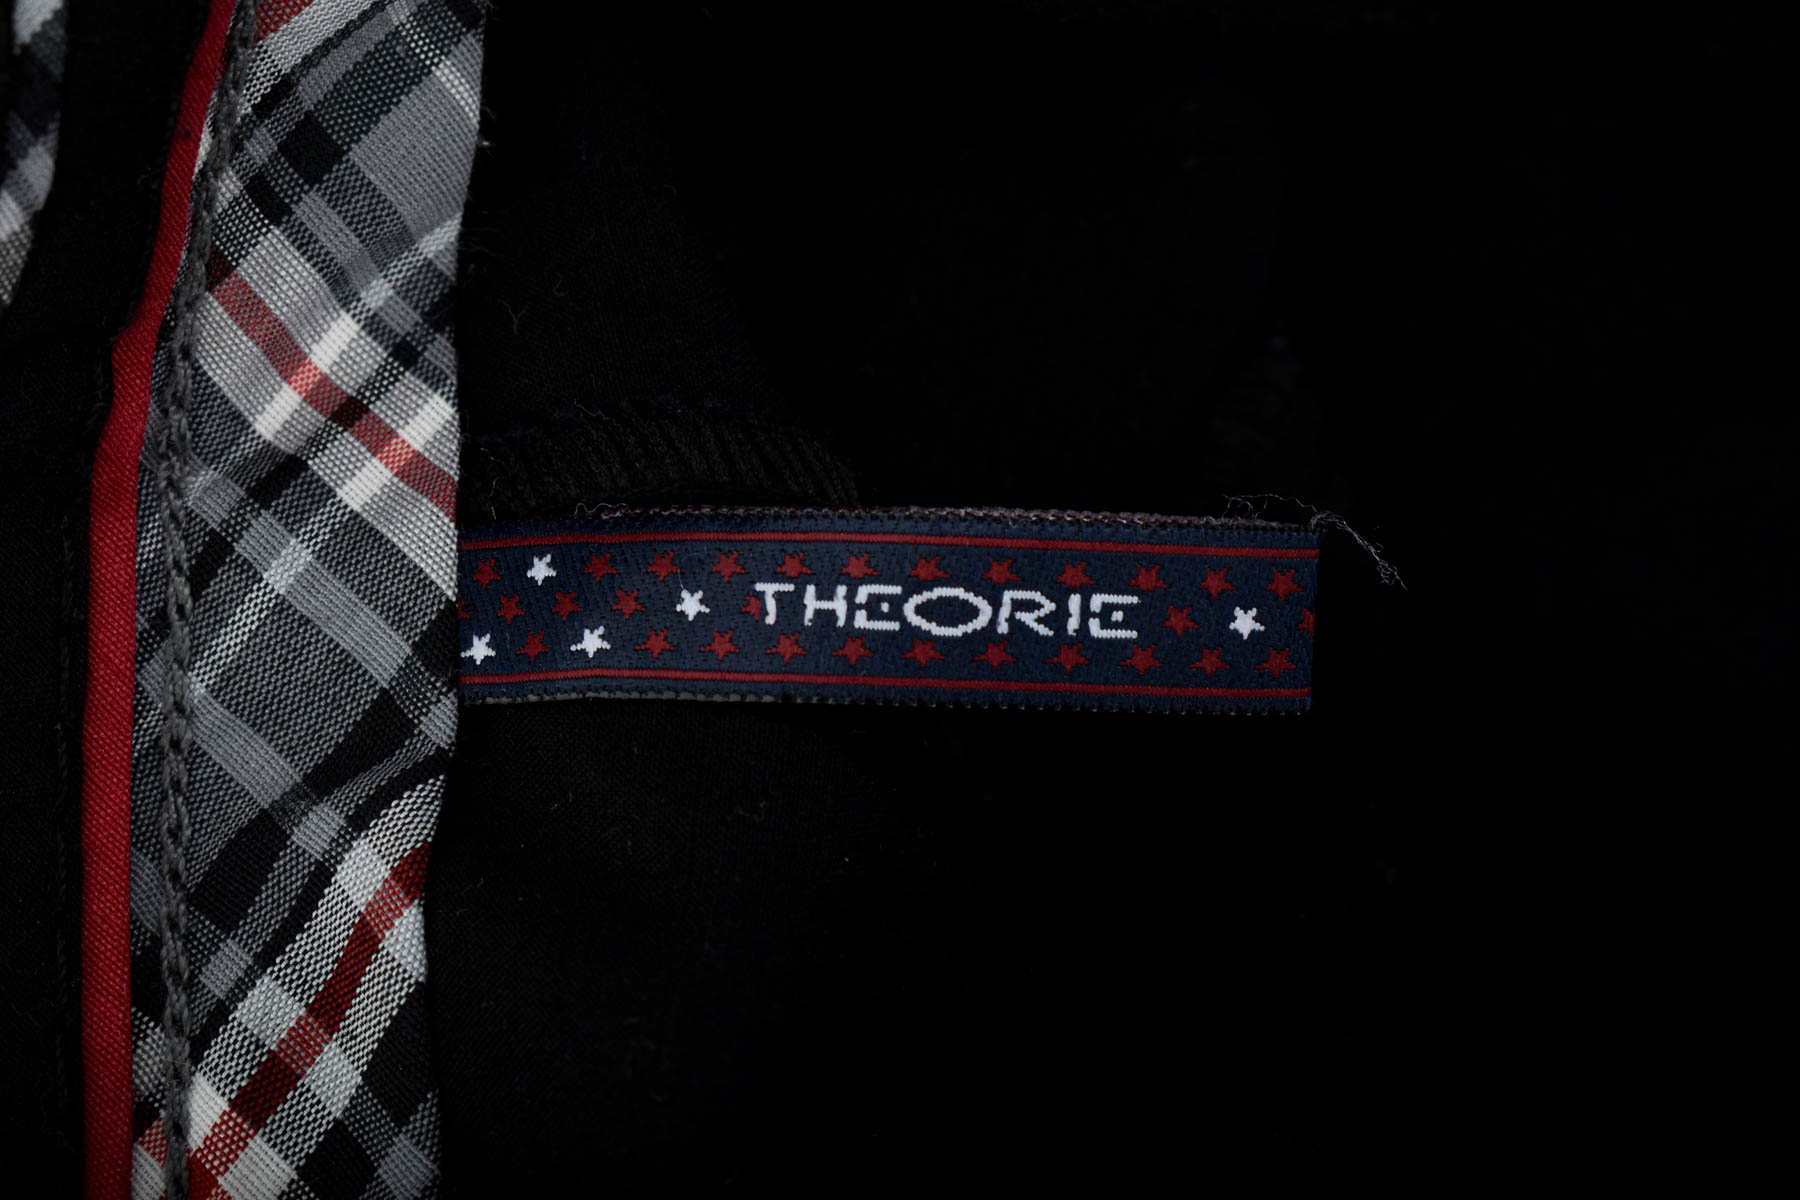 Men's trousers - Theorie - 2